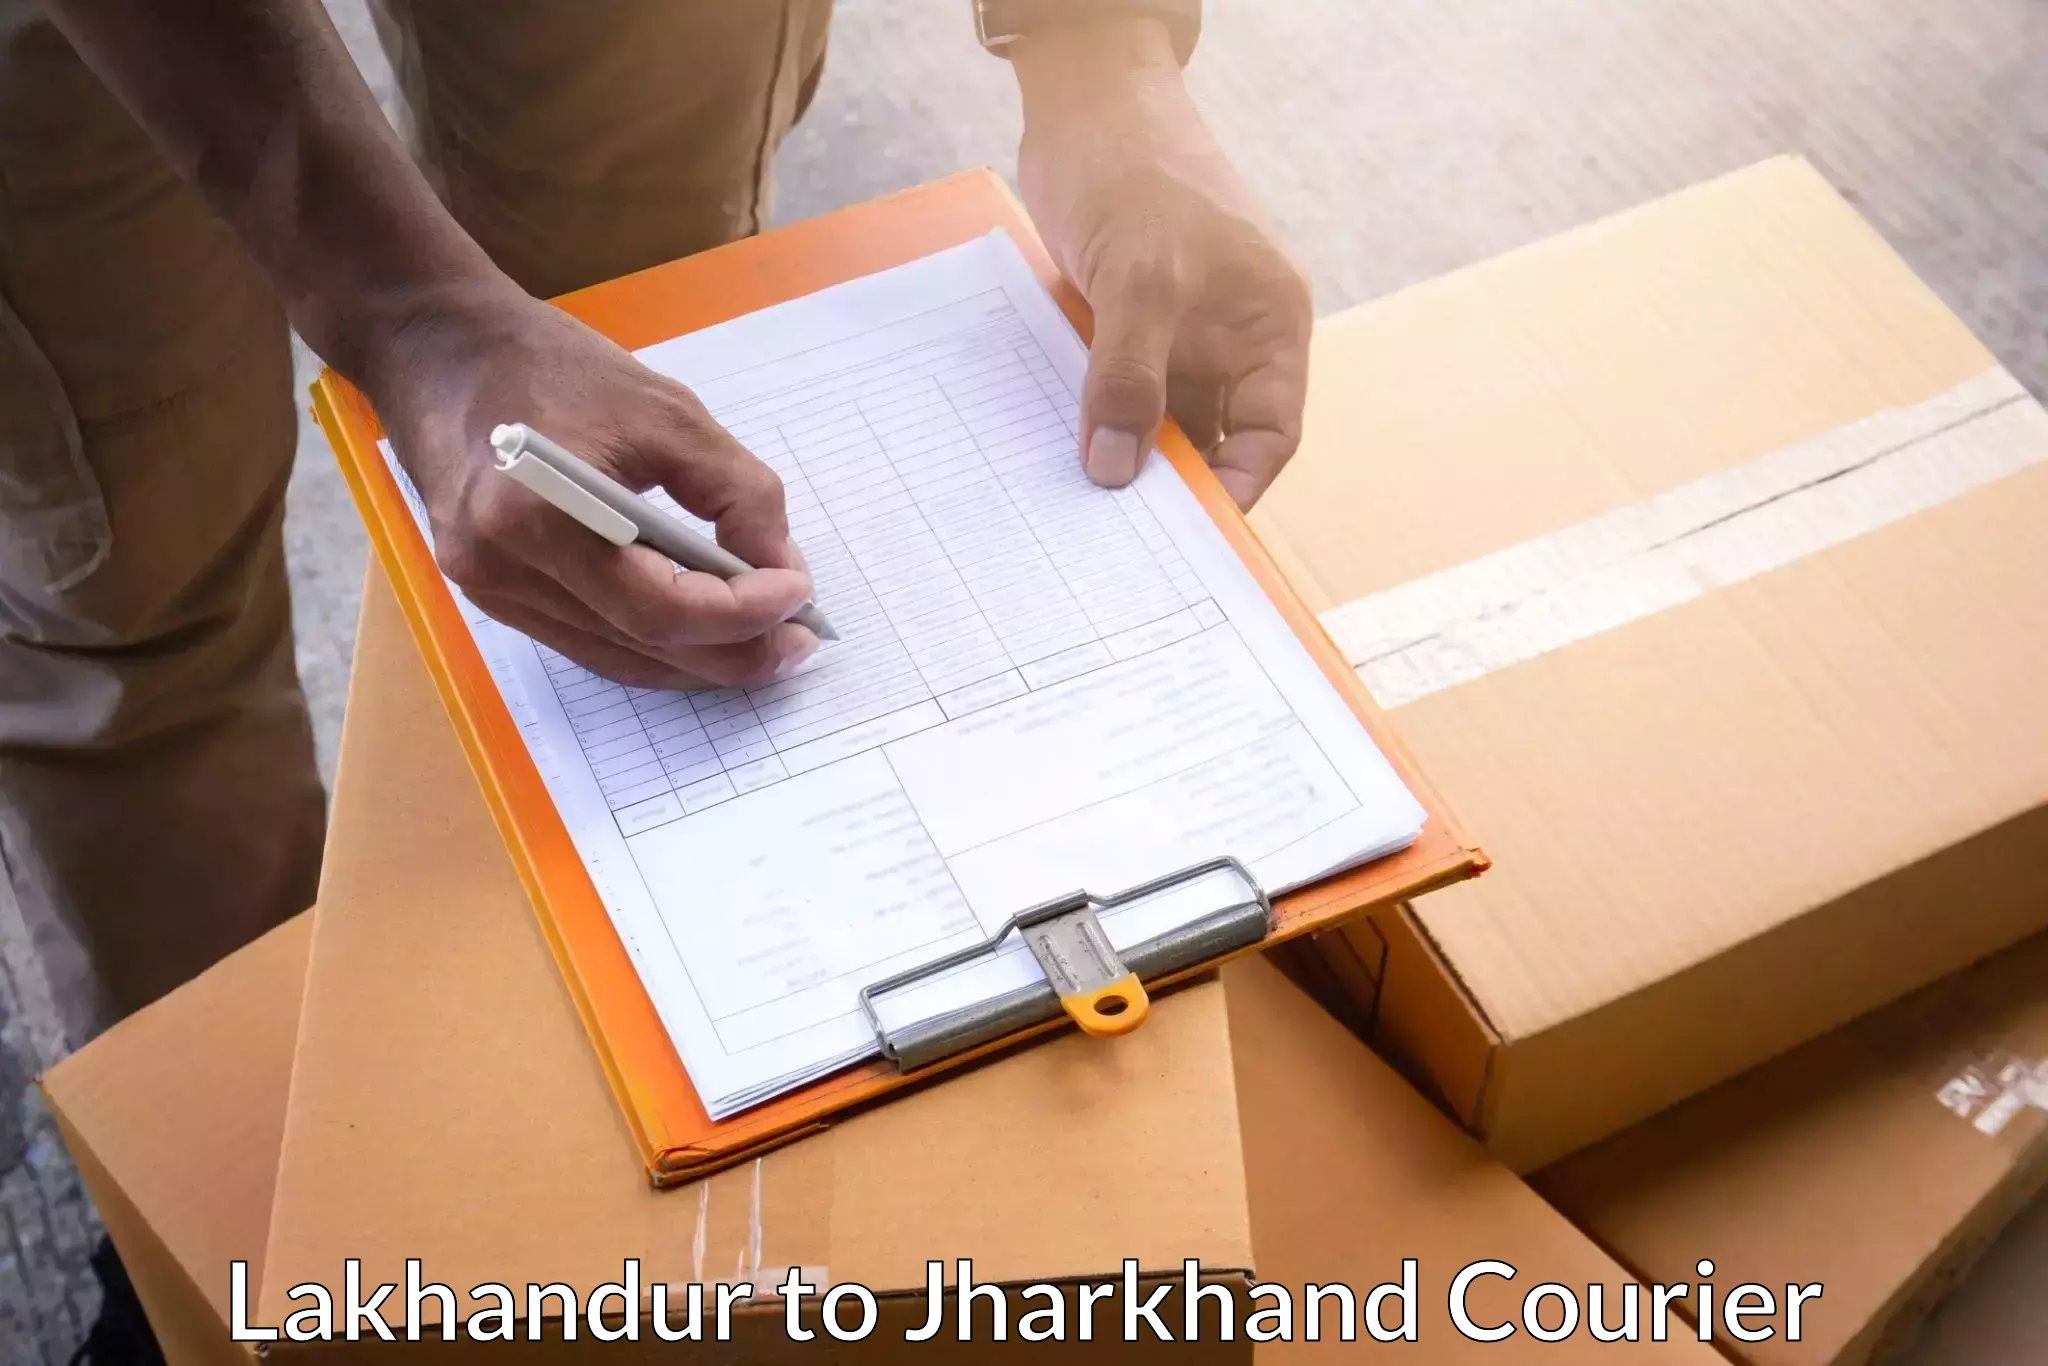 Same-day delivery options in Lakhandur to Chhatarpur Palamu